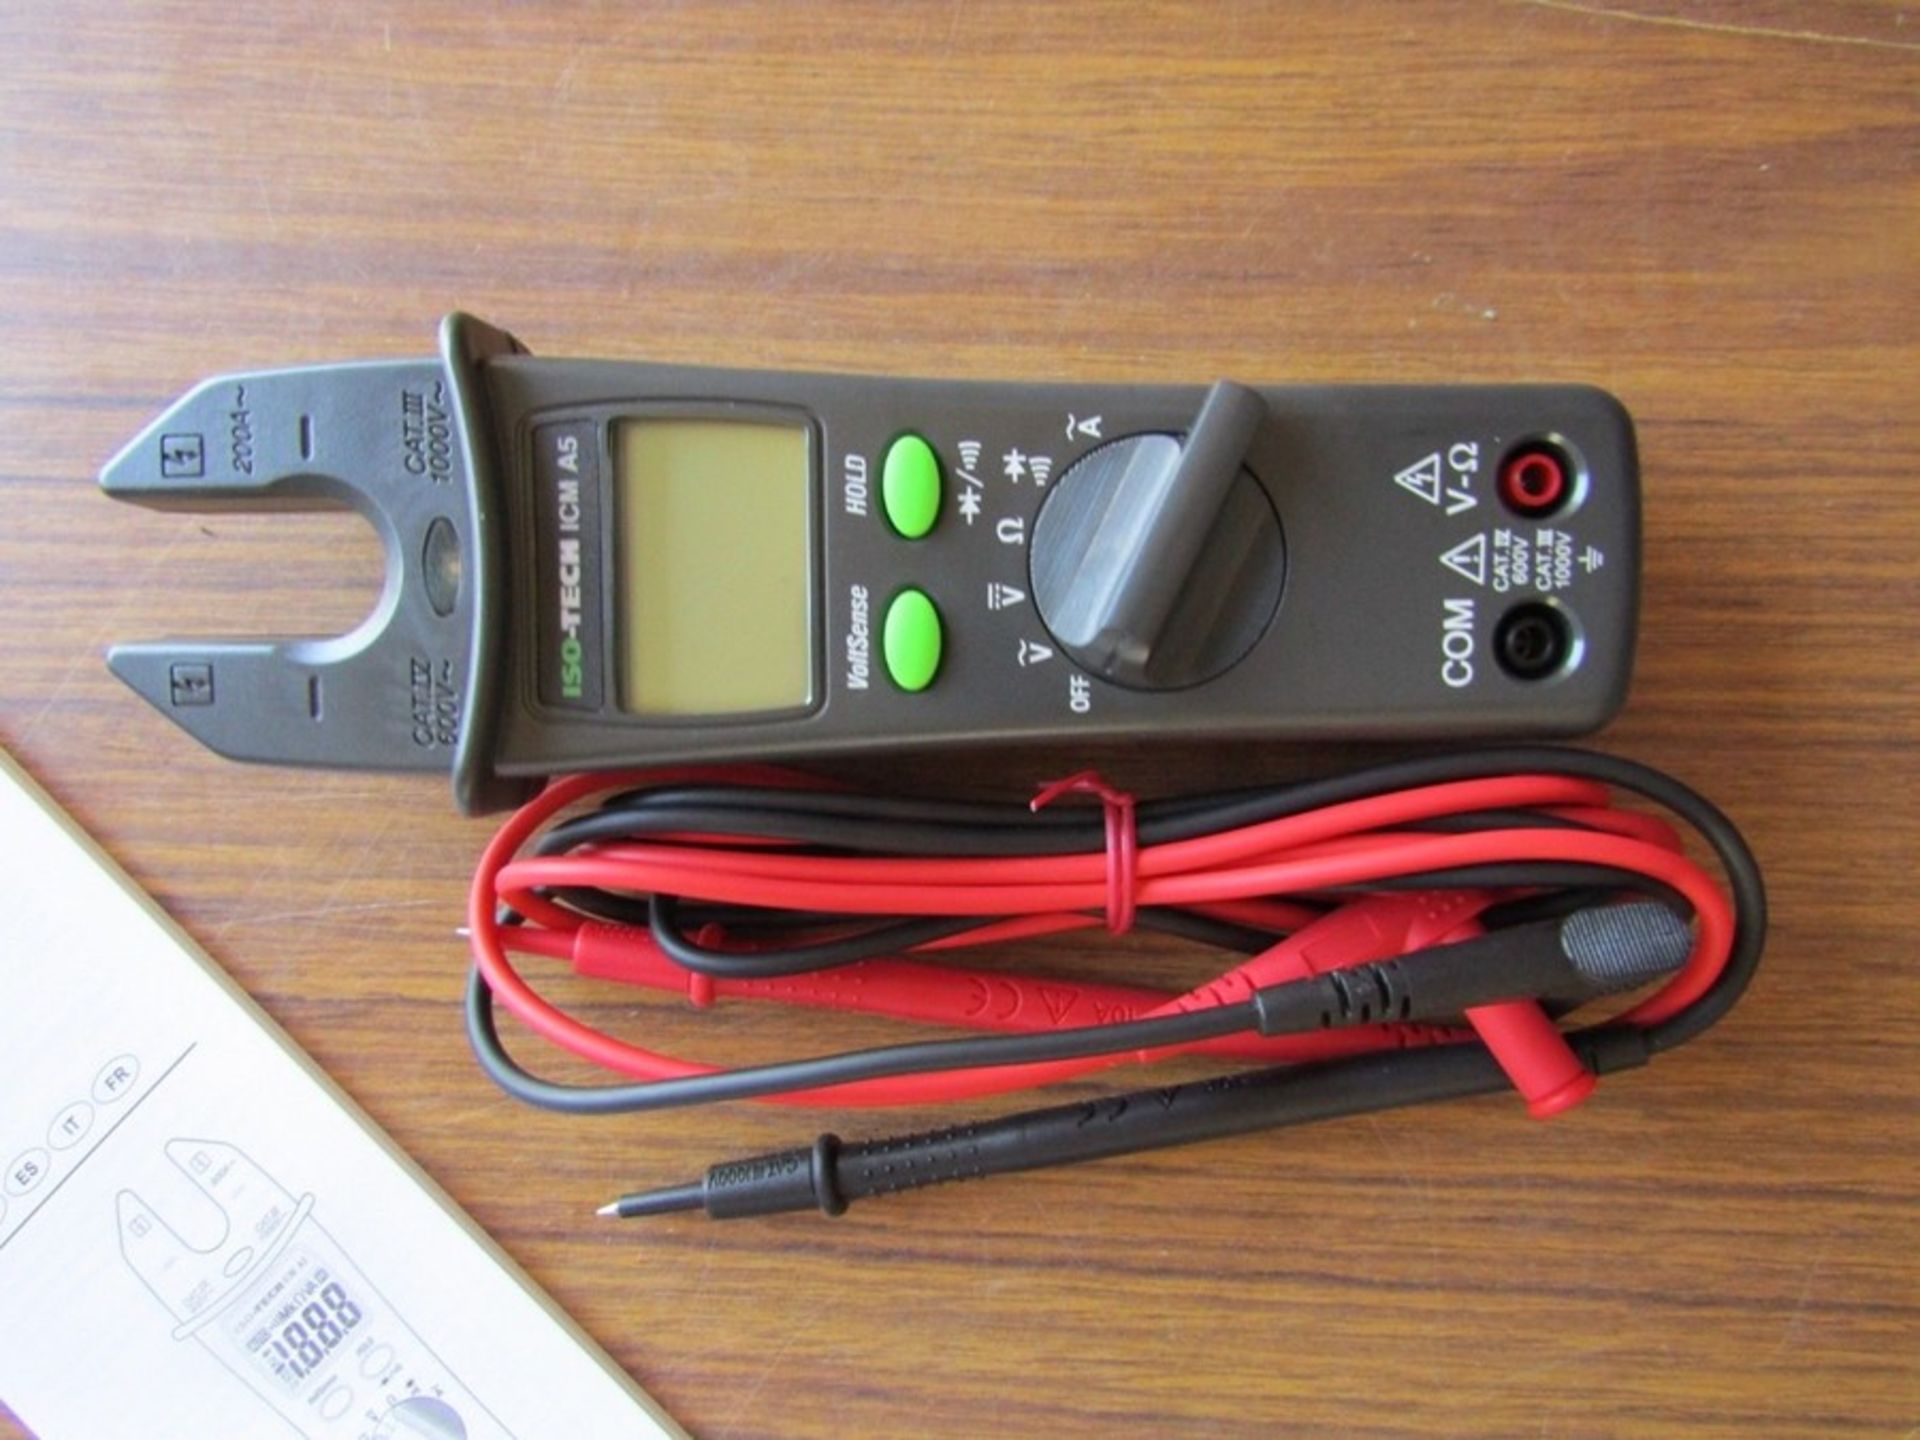 ISO-TECH ICMA5 Clamp Meter, Max Current 200A ac CAT IV 600V - J2 6973989